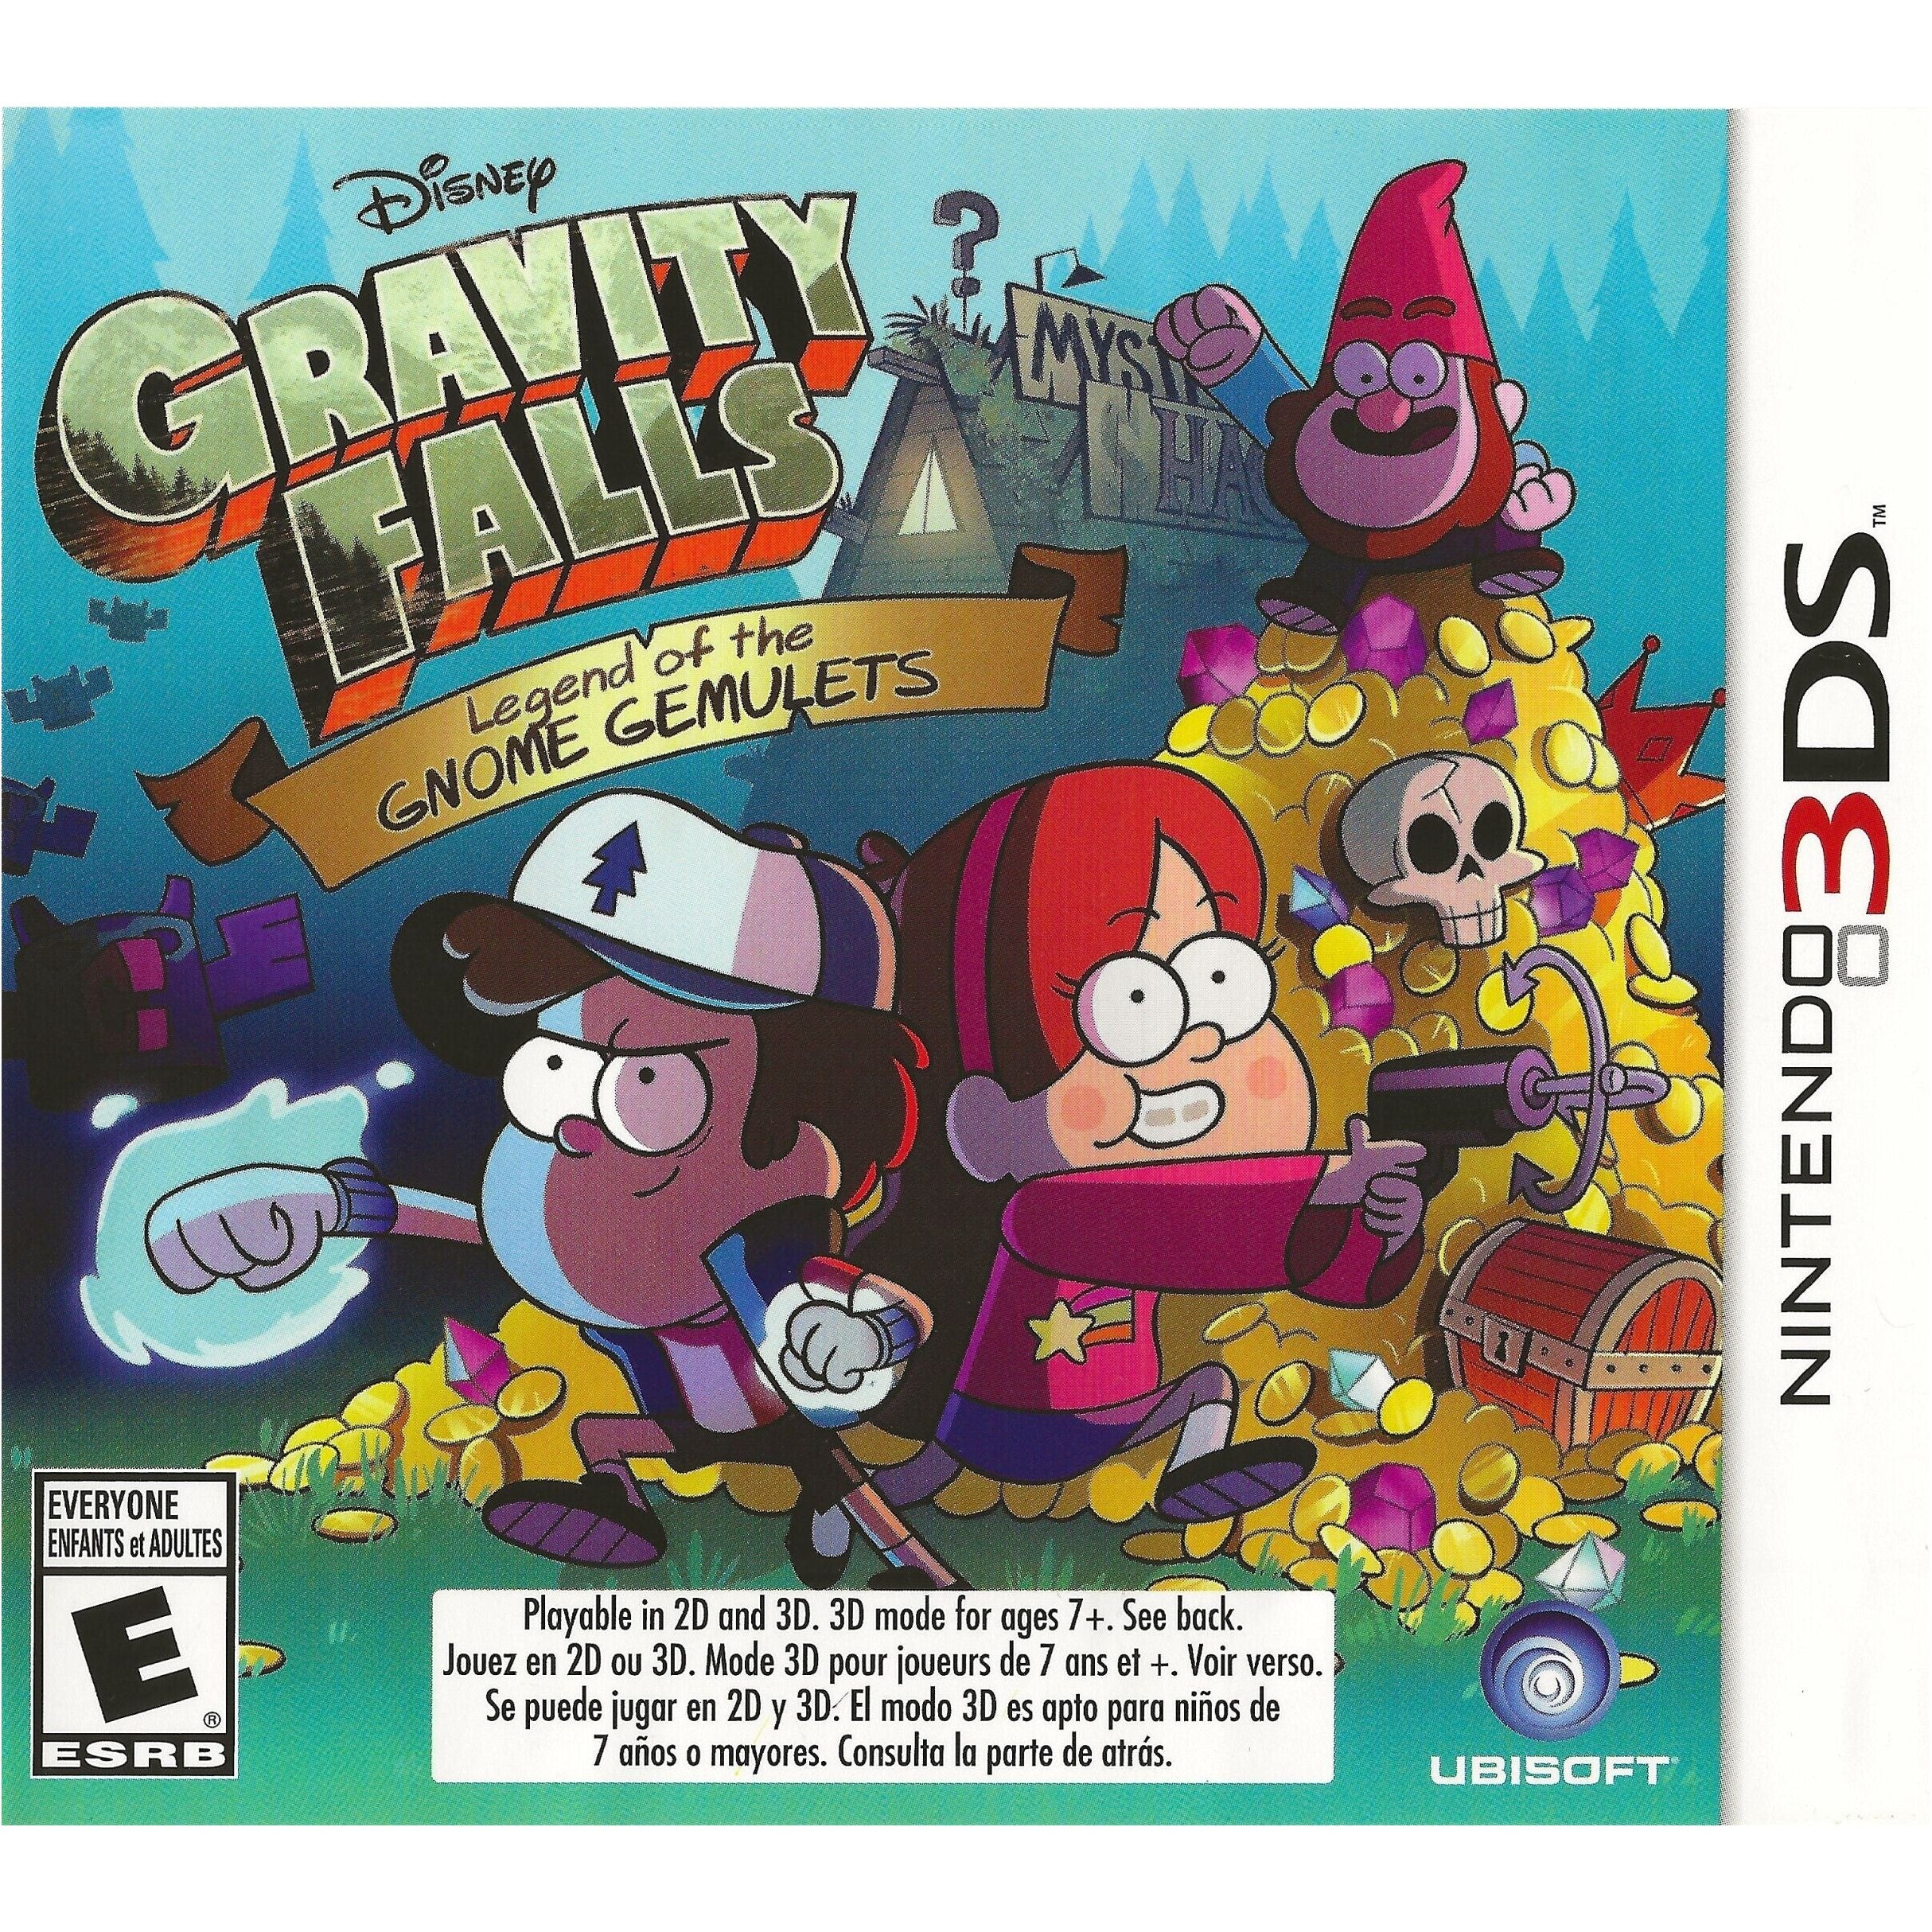 3DS - Gravity Falls Legend of the Gnome Gemulets (In Case)